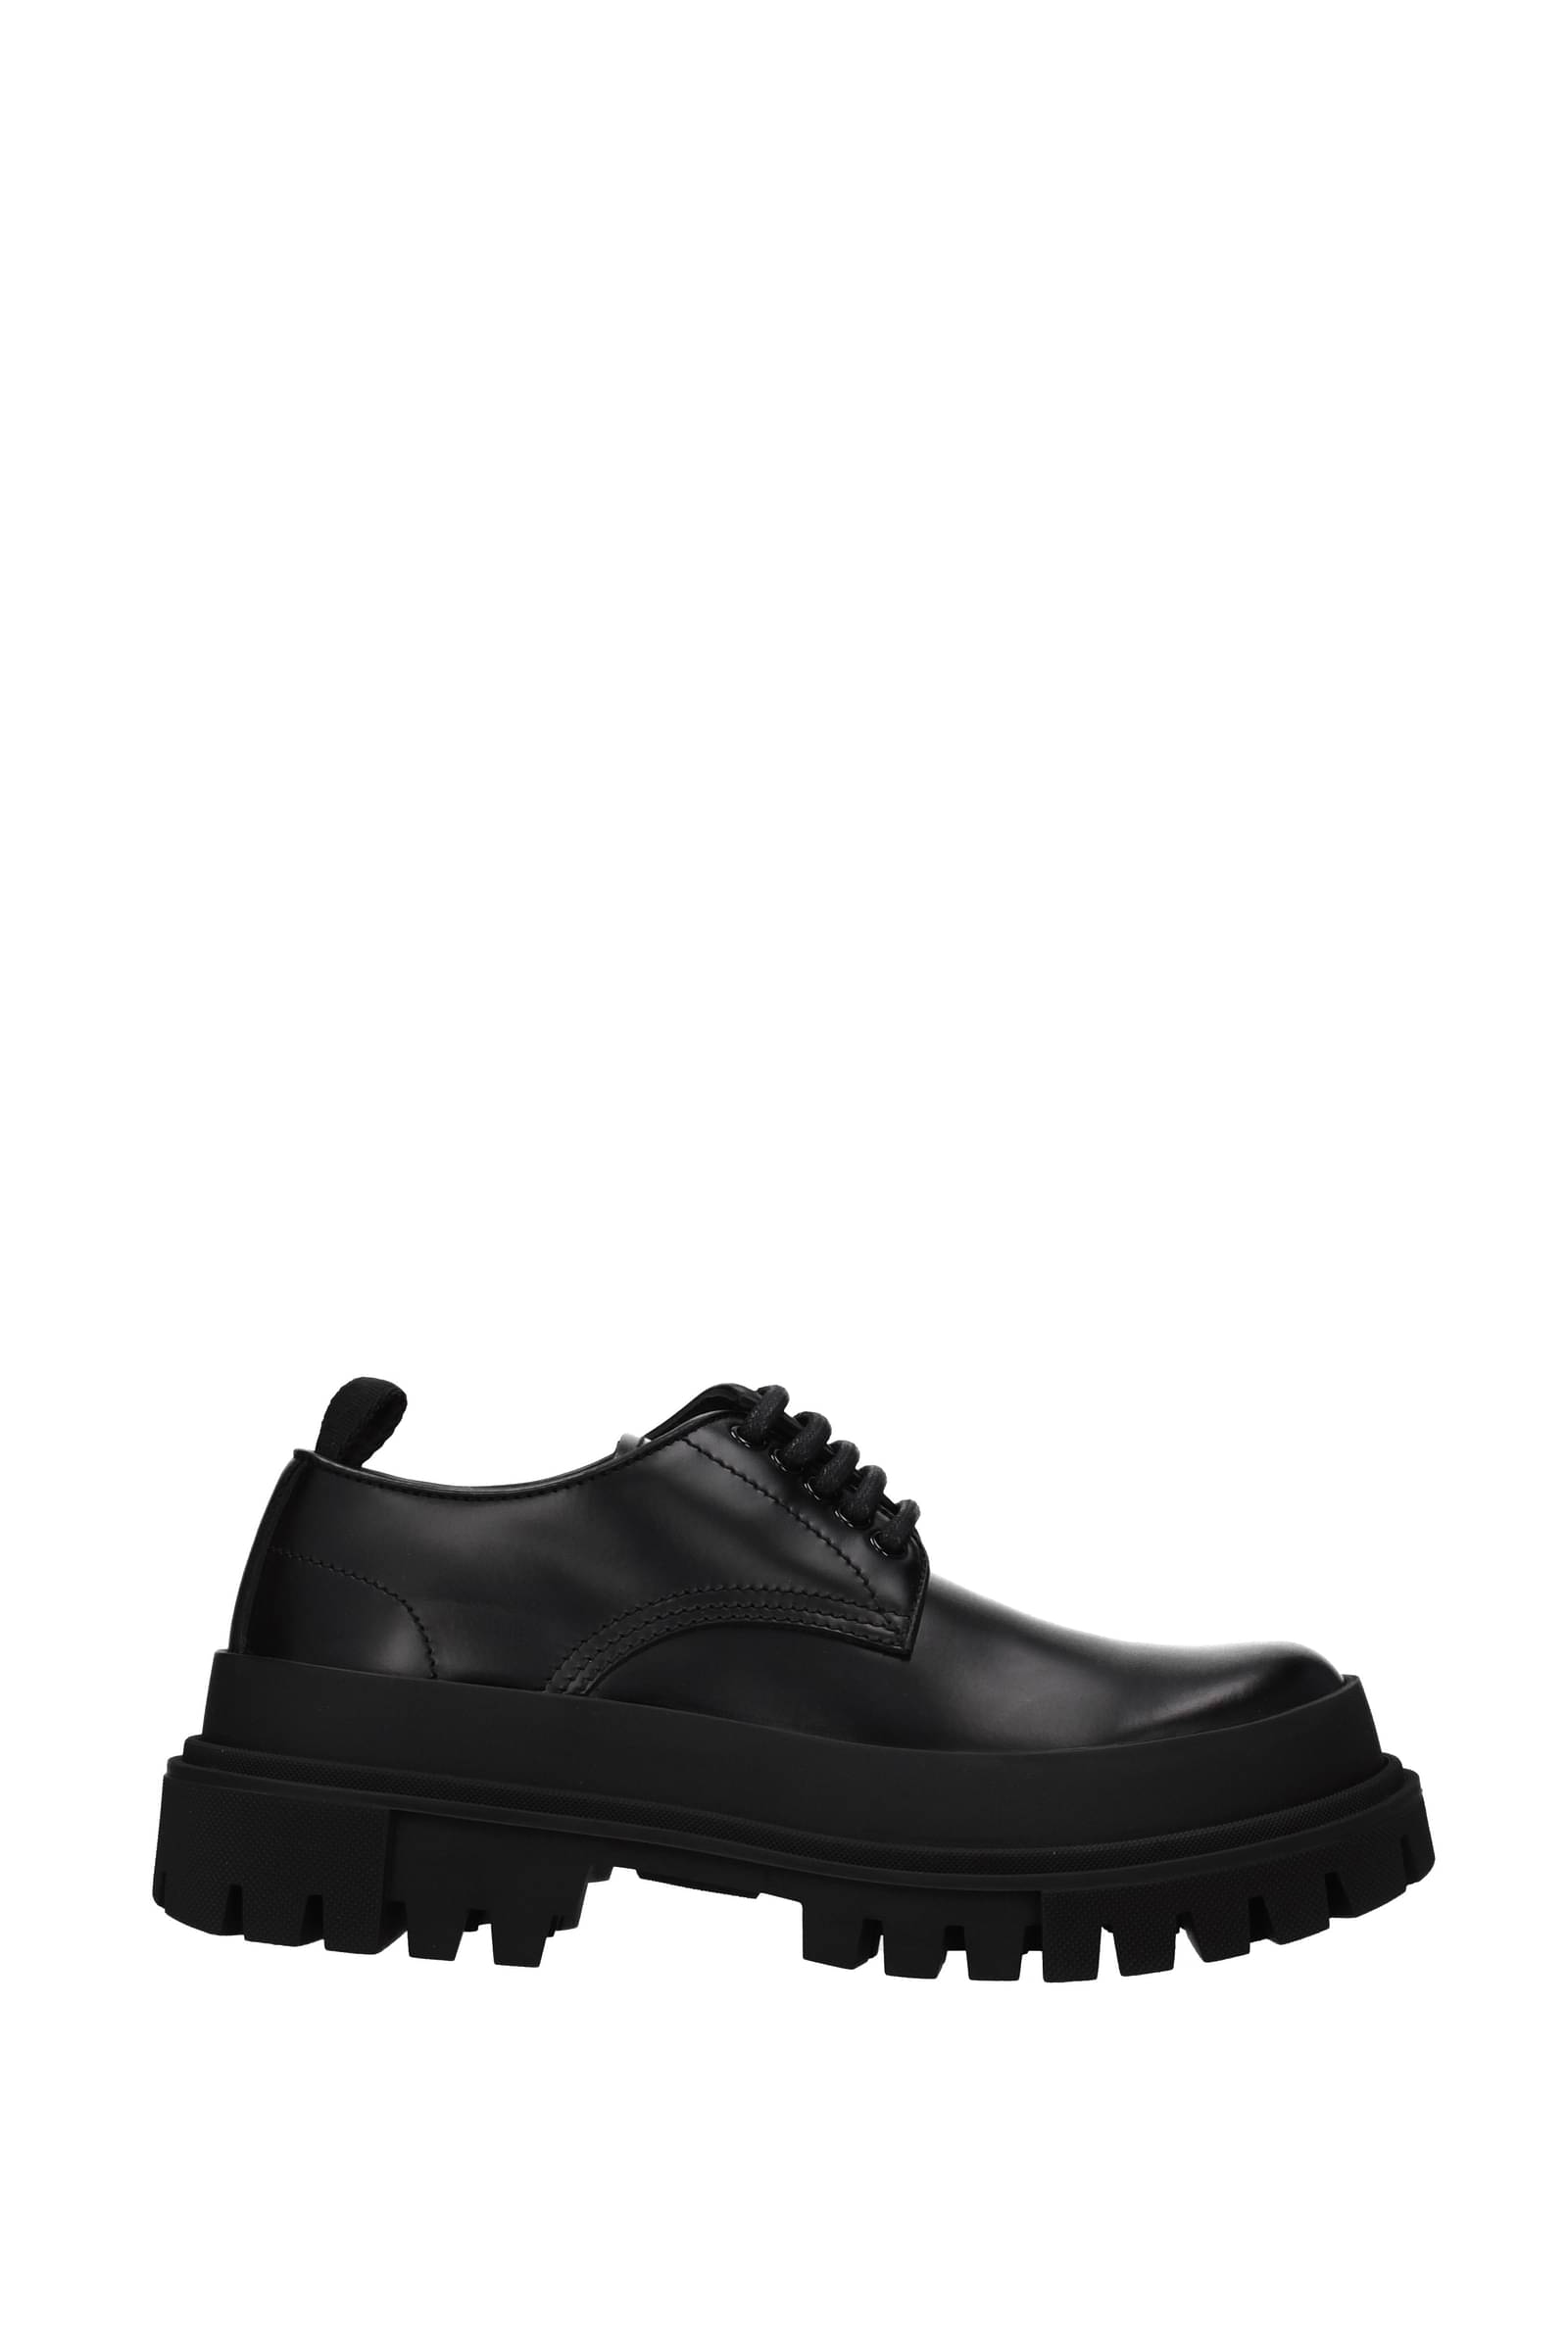 DOLCE & GABBANA LACE UP AND MONKSTRAP LEATHER BLACK